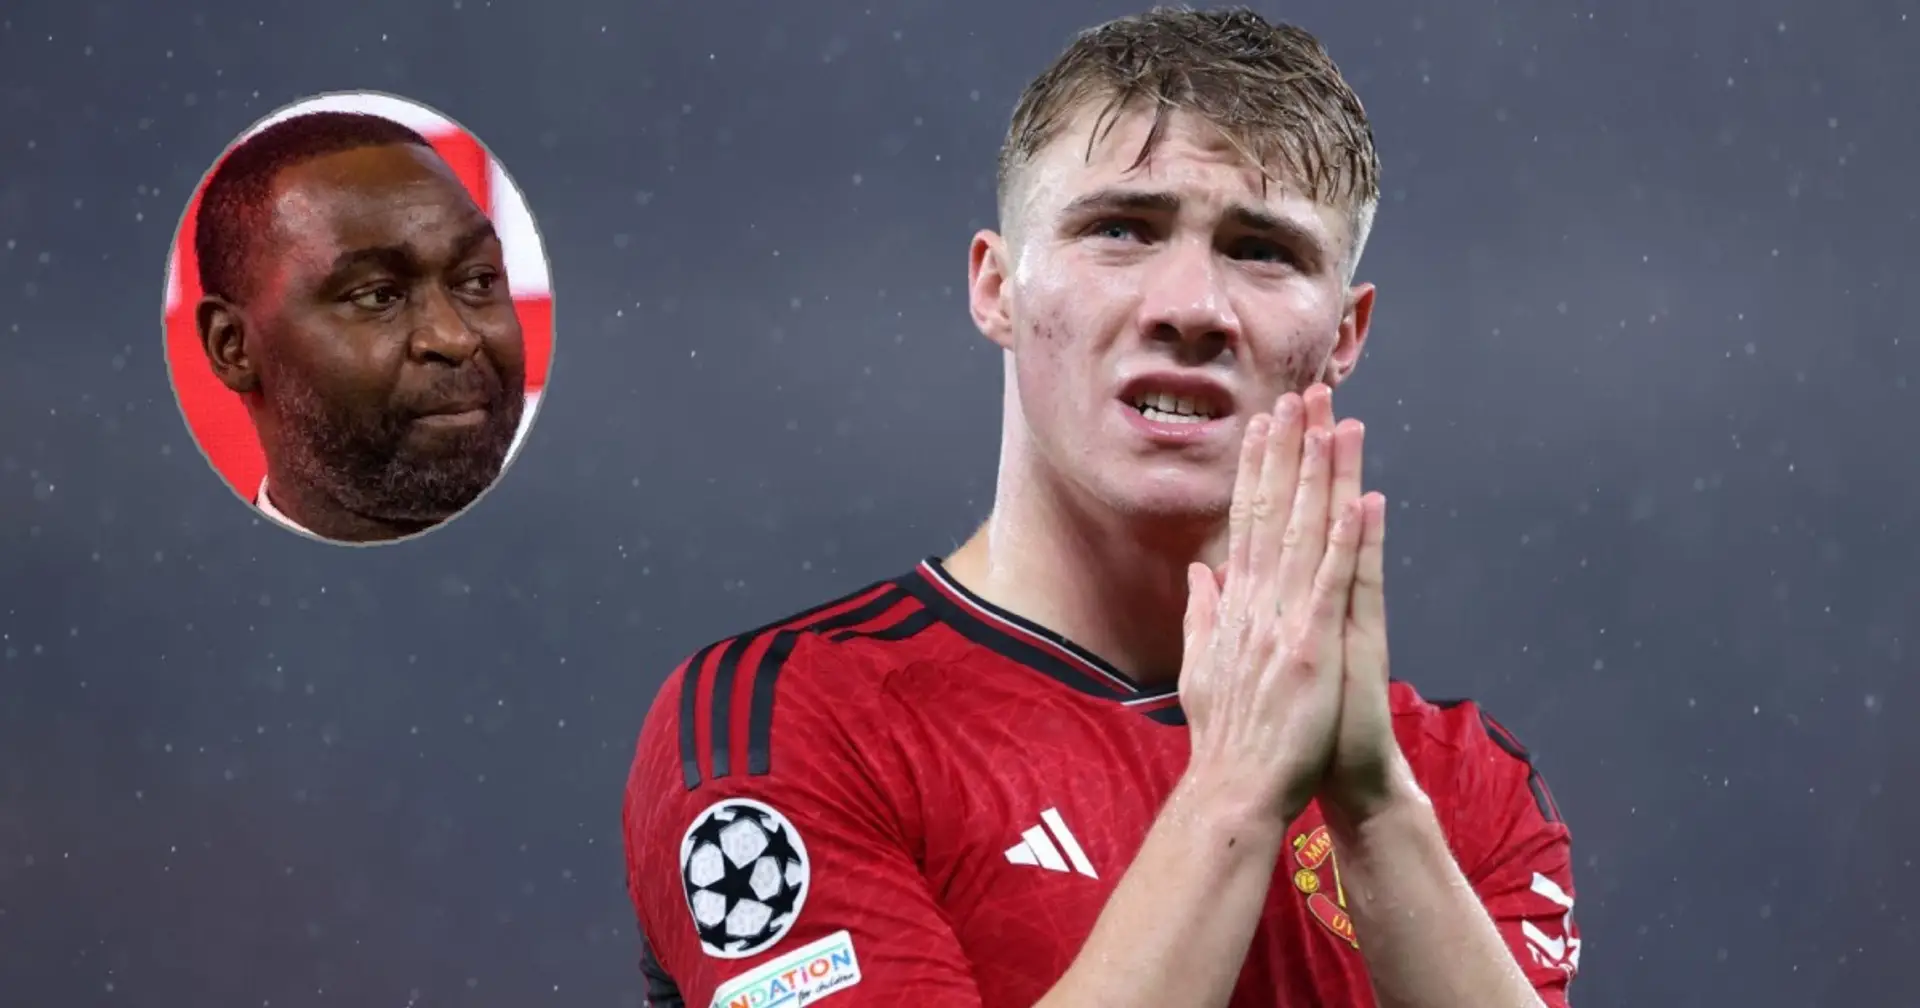 '150%': Andy Coles names striker he'd sign at Man United even if was for a training session